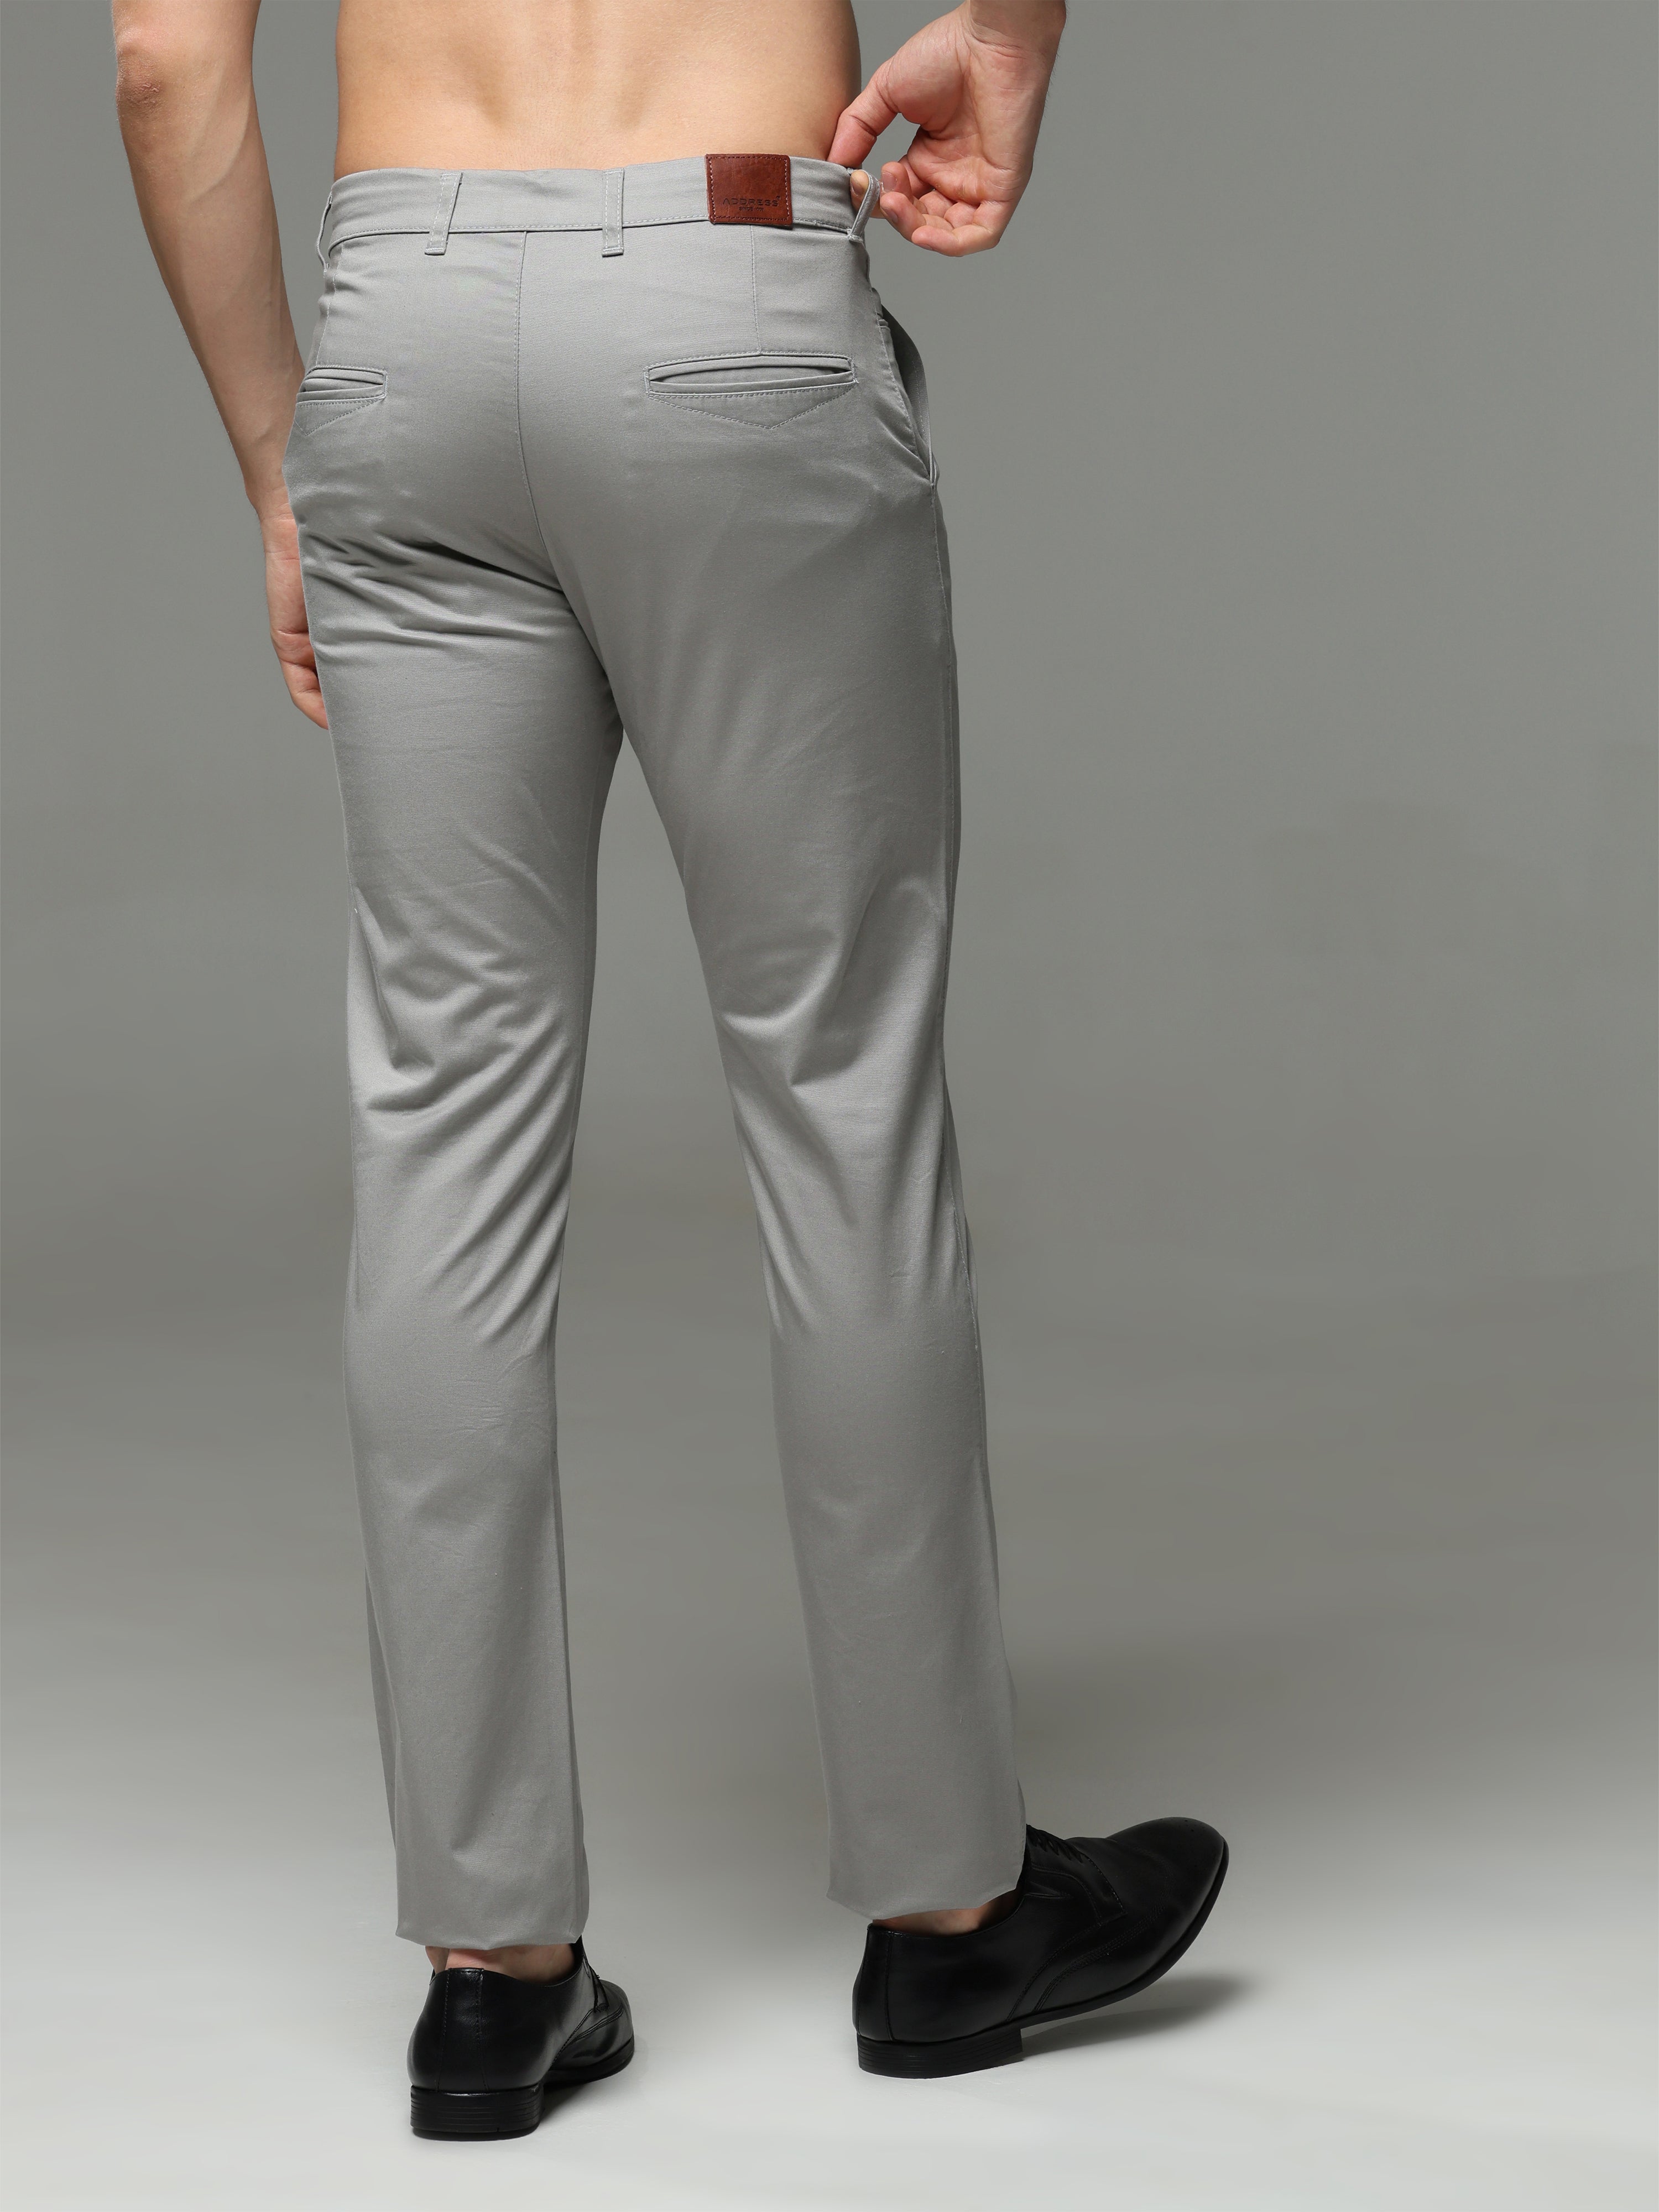 Oyster Bay Stretch cotton trouser